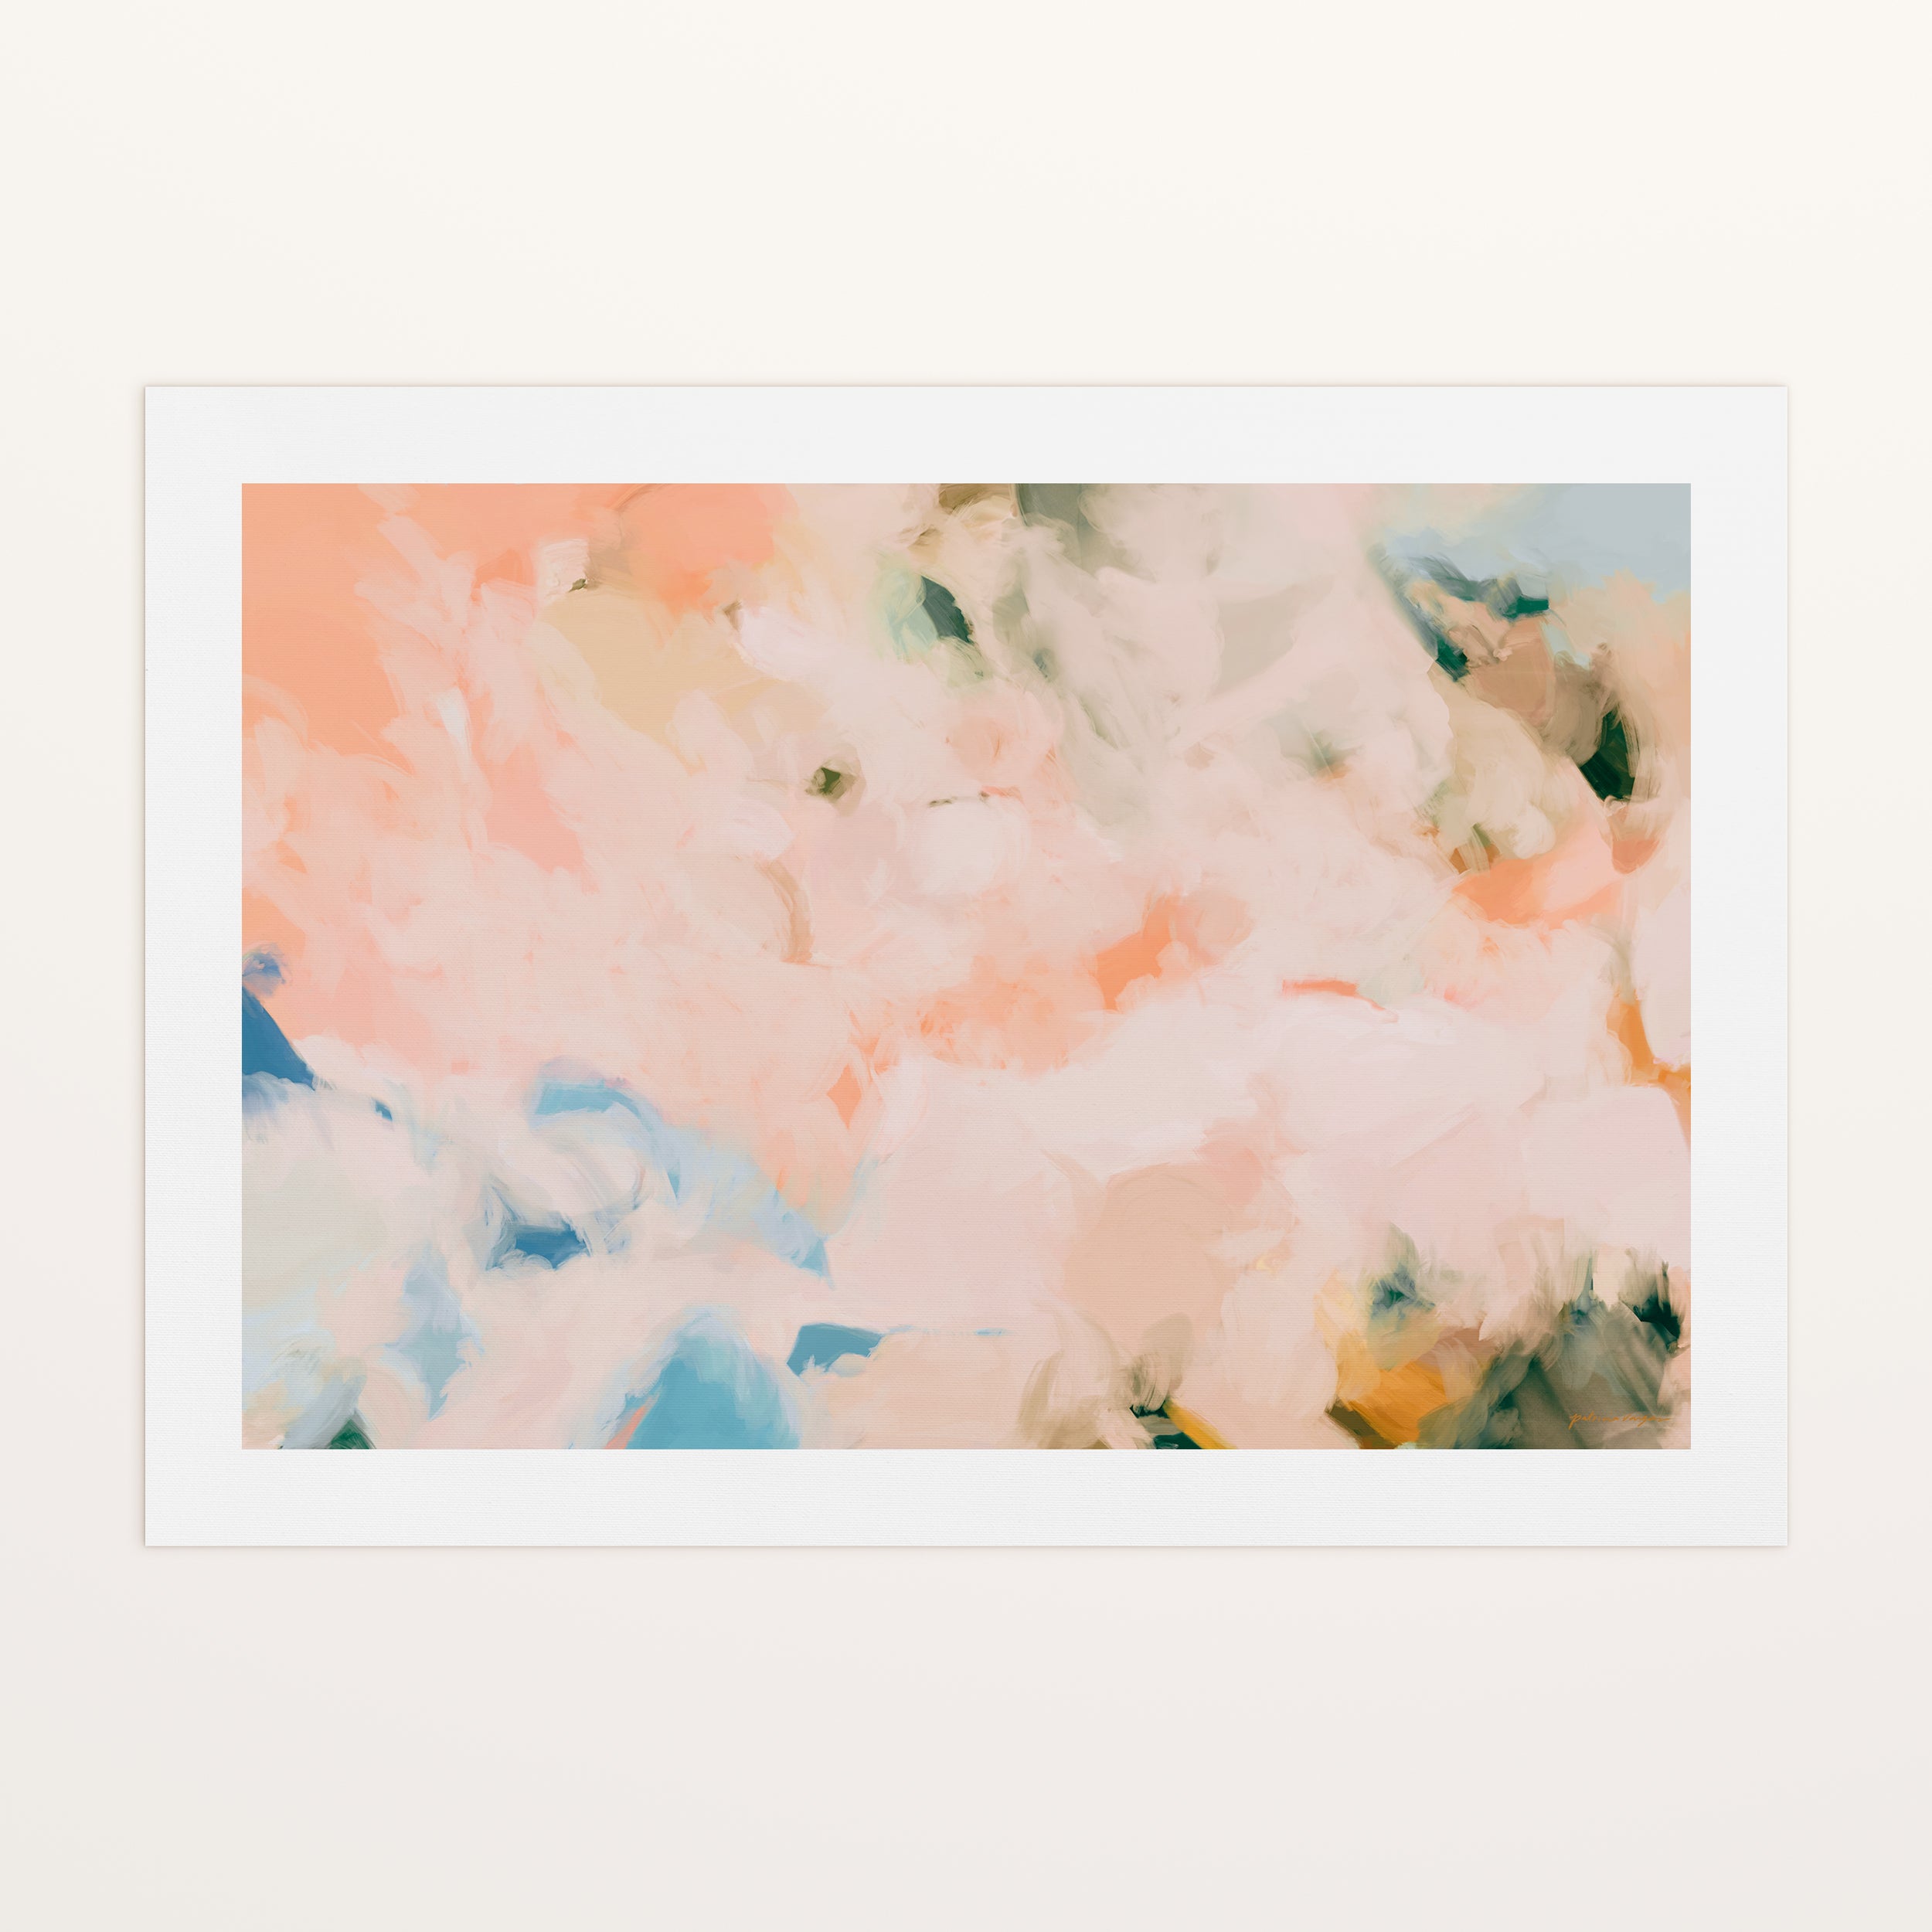 Peach Season, pink and blue colorful abstract canvas wall art print by Parima Studio